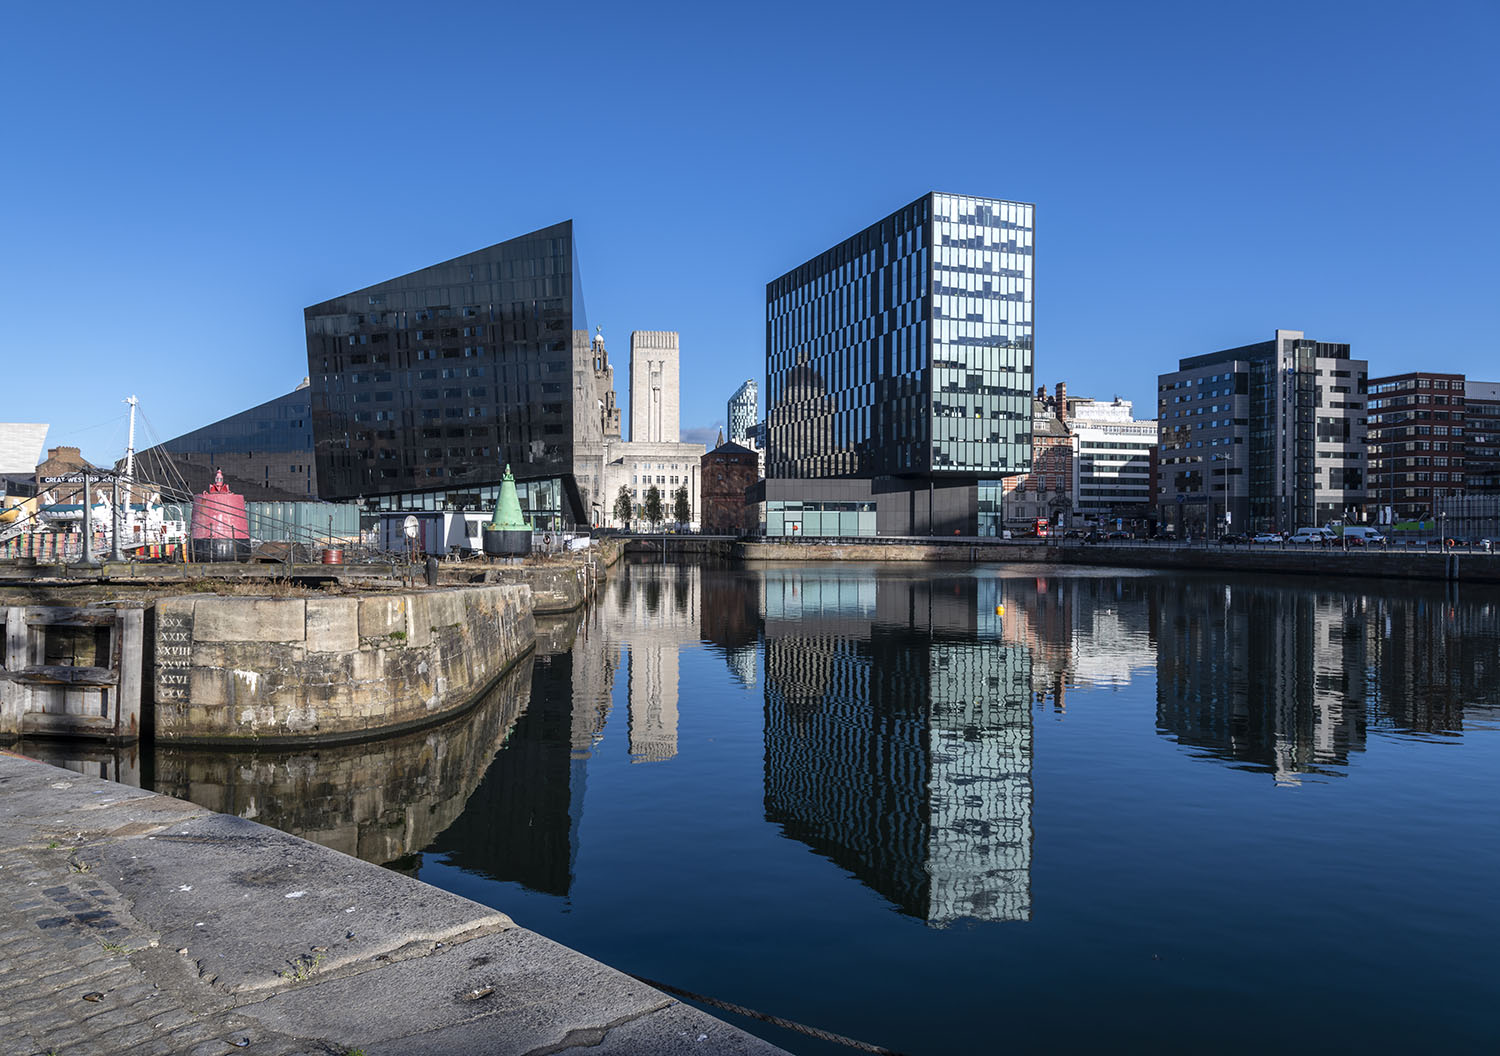 Serene looking scene of still water across the iconic Albert Dock looking towards the dramatic modern architecture of the renovated Mann Island area.